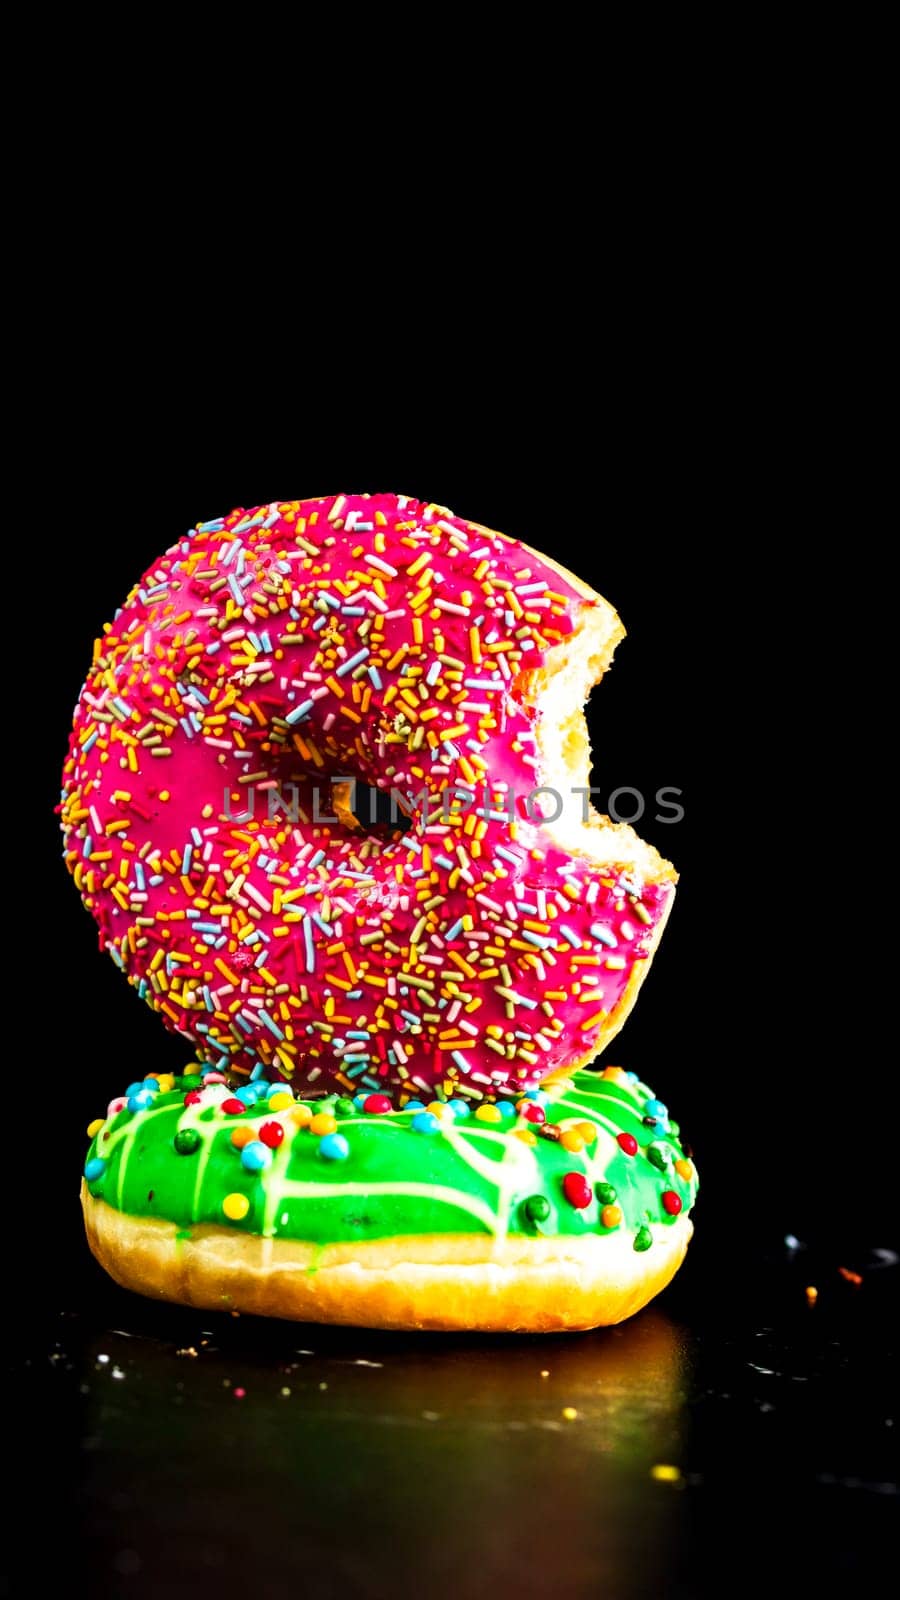 Bitten pink glazed donut with sprinkles isolated. Close up of colorful donuts.